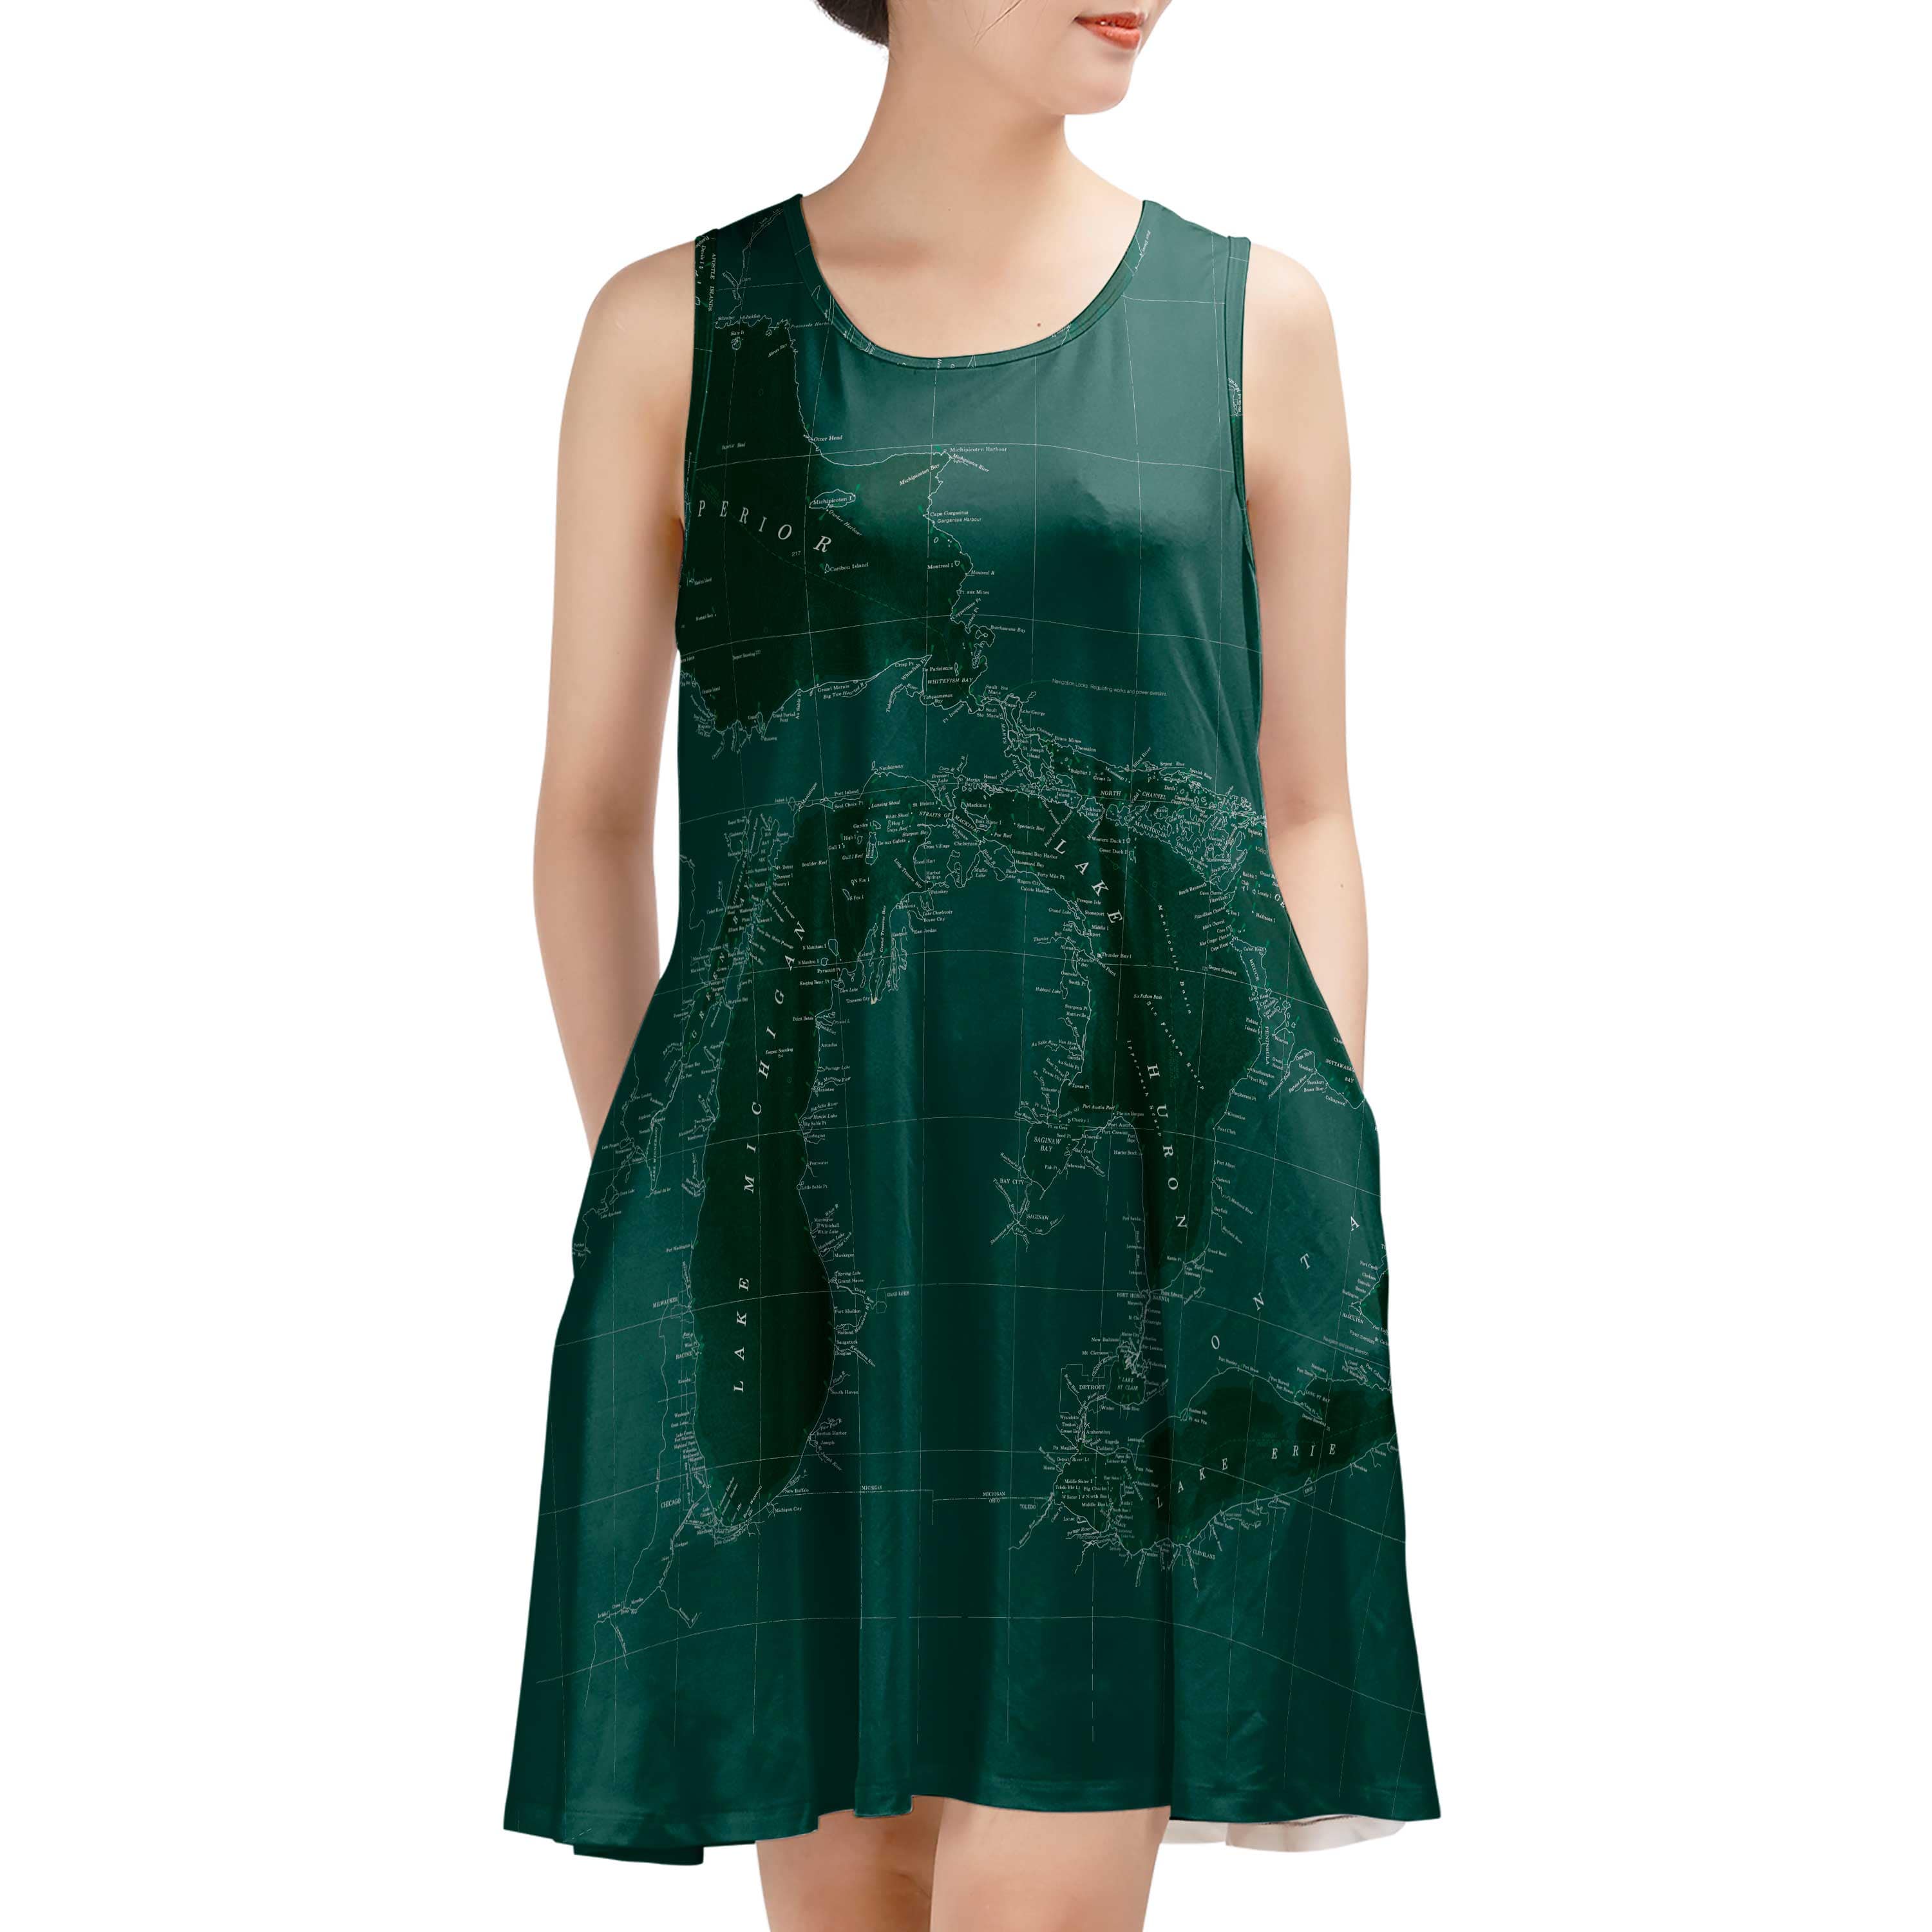 The Great Lakes Green and White Sundress